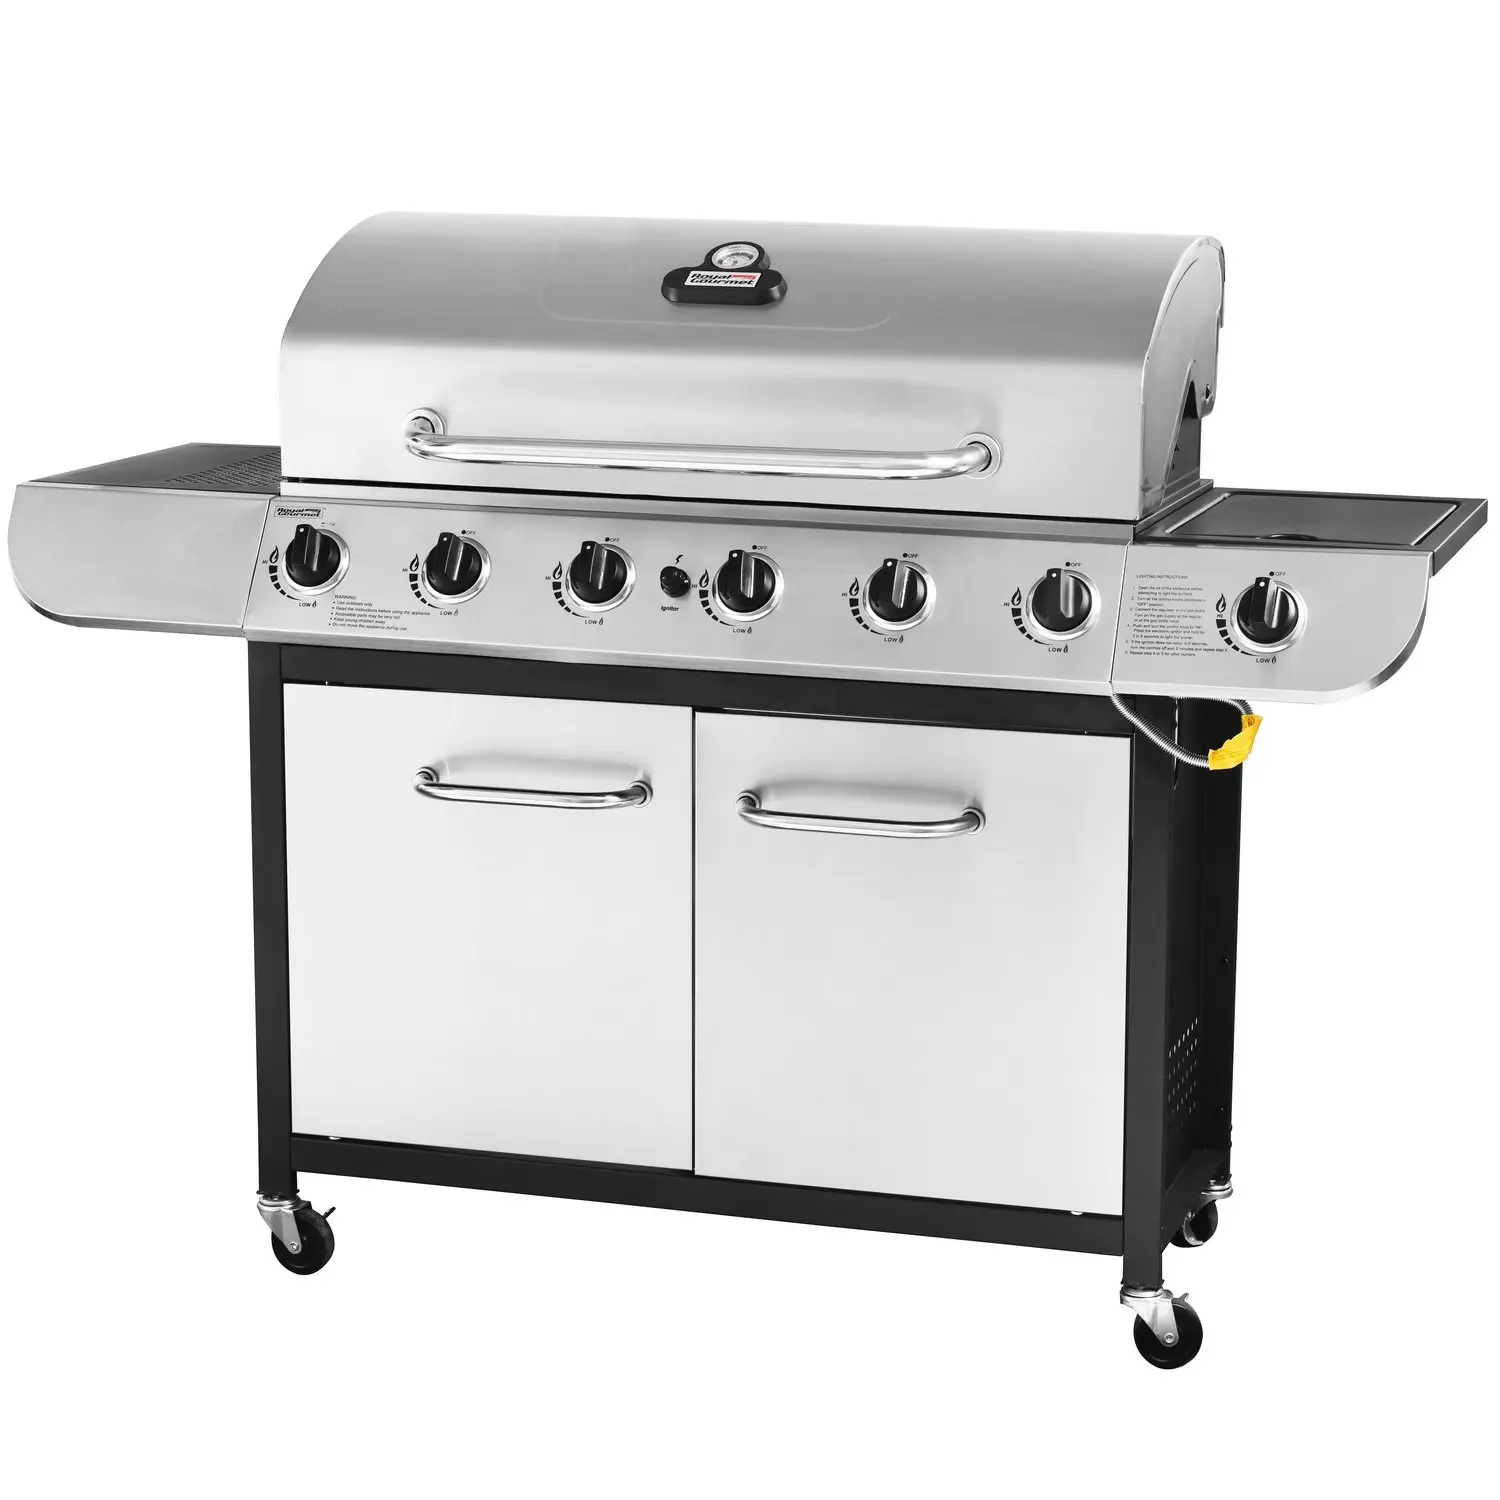 Cheap Stainless Steel Grill Burner find Stainless Steel Grill